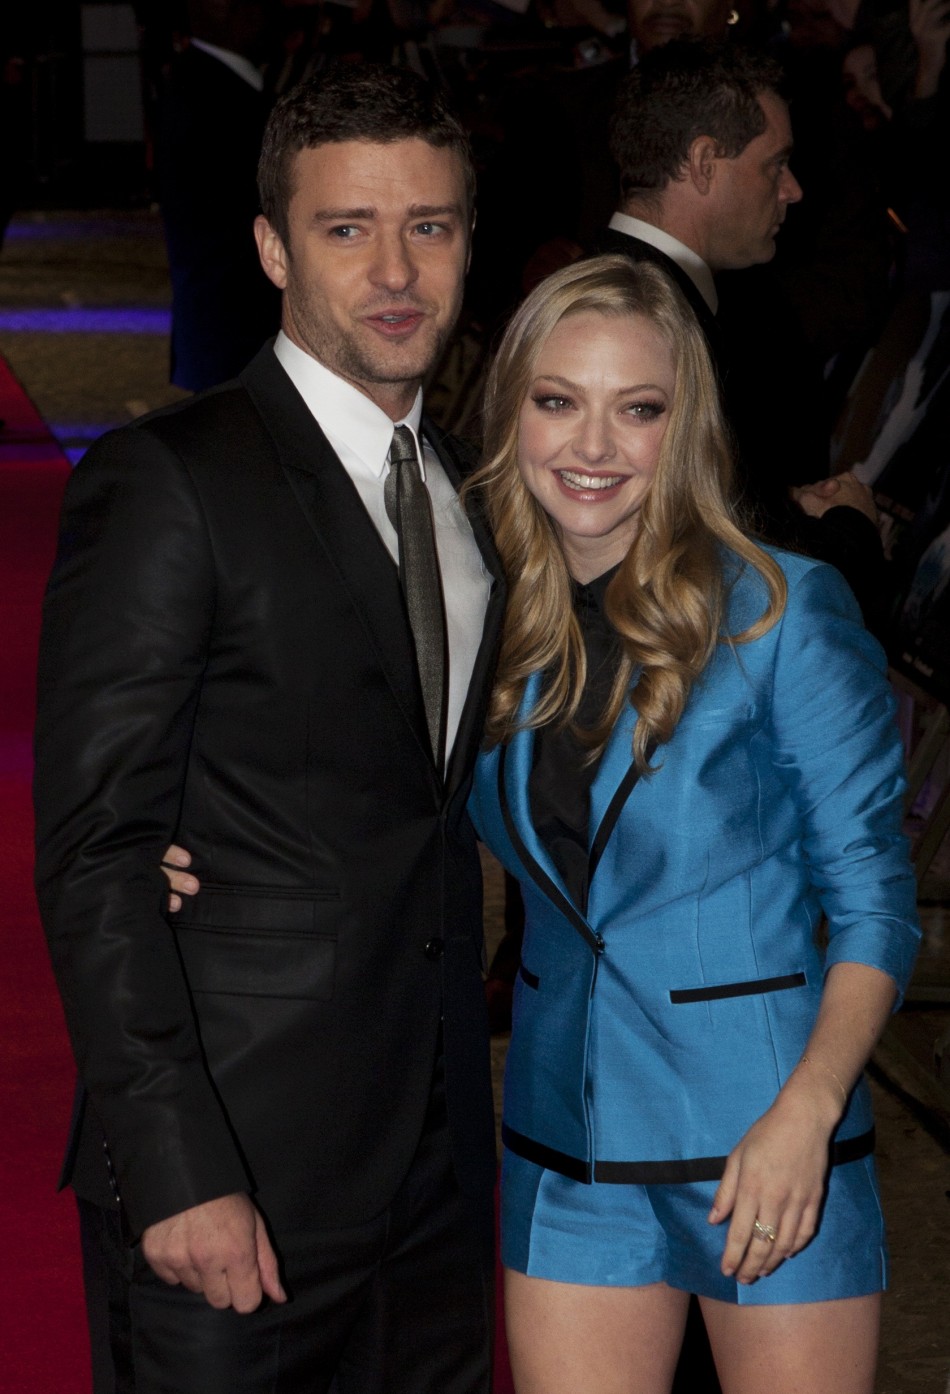 Justin Timberlake L and Amanda Seyfried pose for photographers at the British premiere of the film quotIn Timequot at the Curzon Mayfair cinema in London October 31, 2011